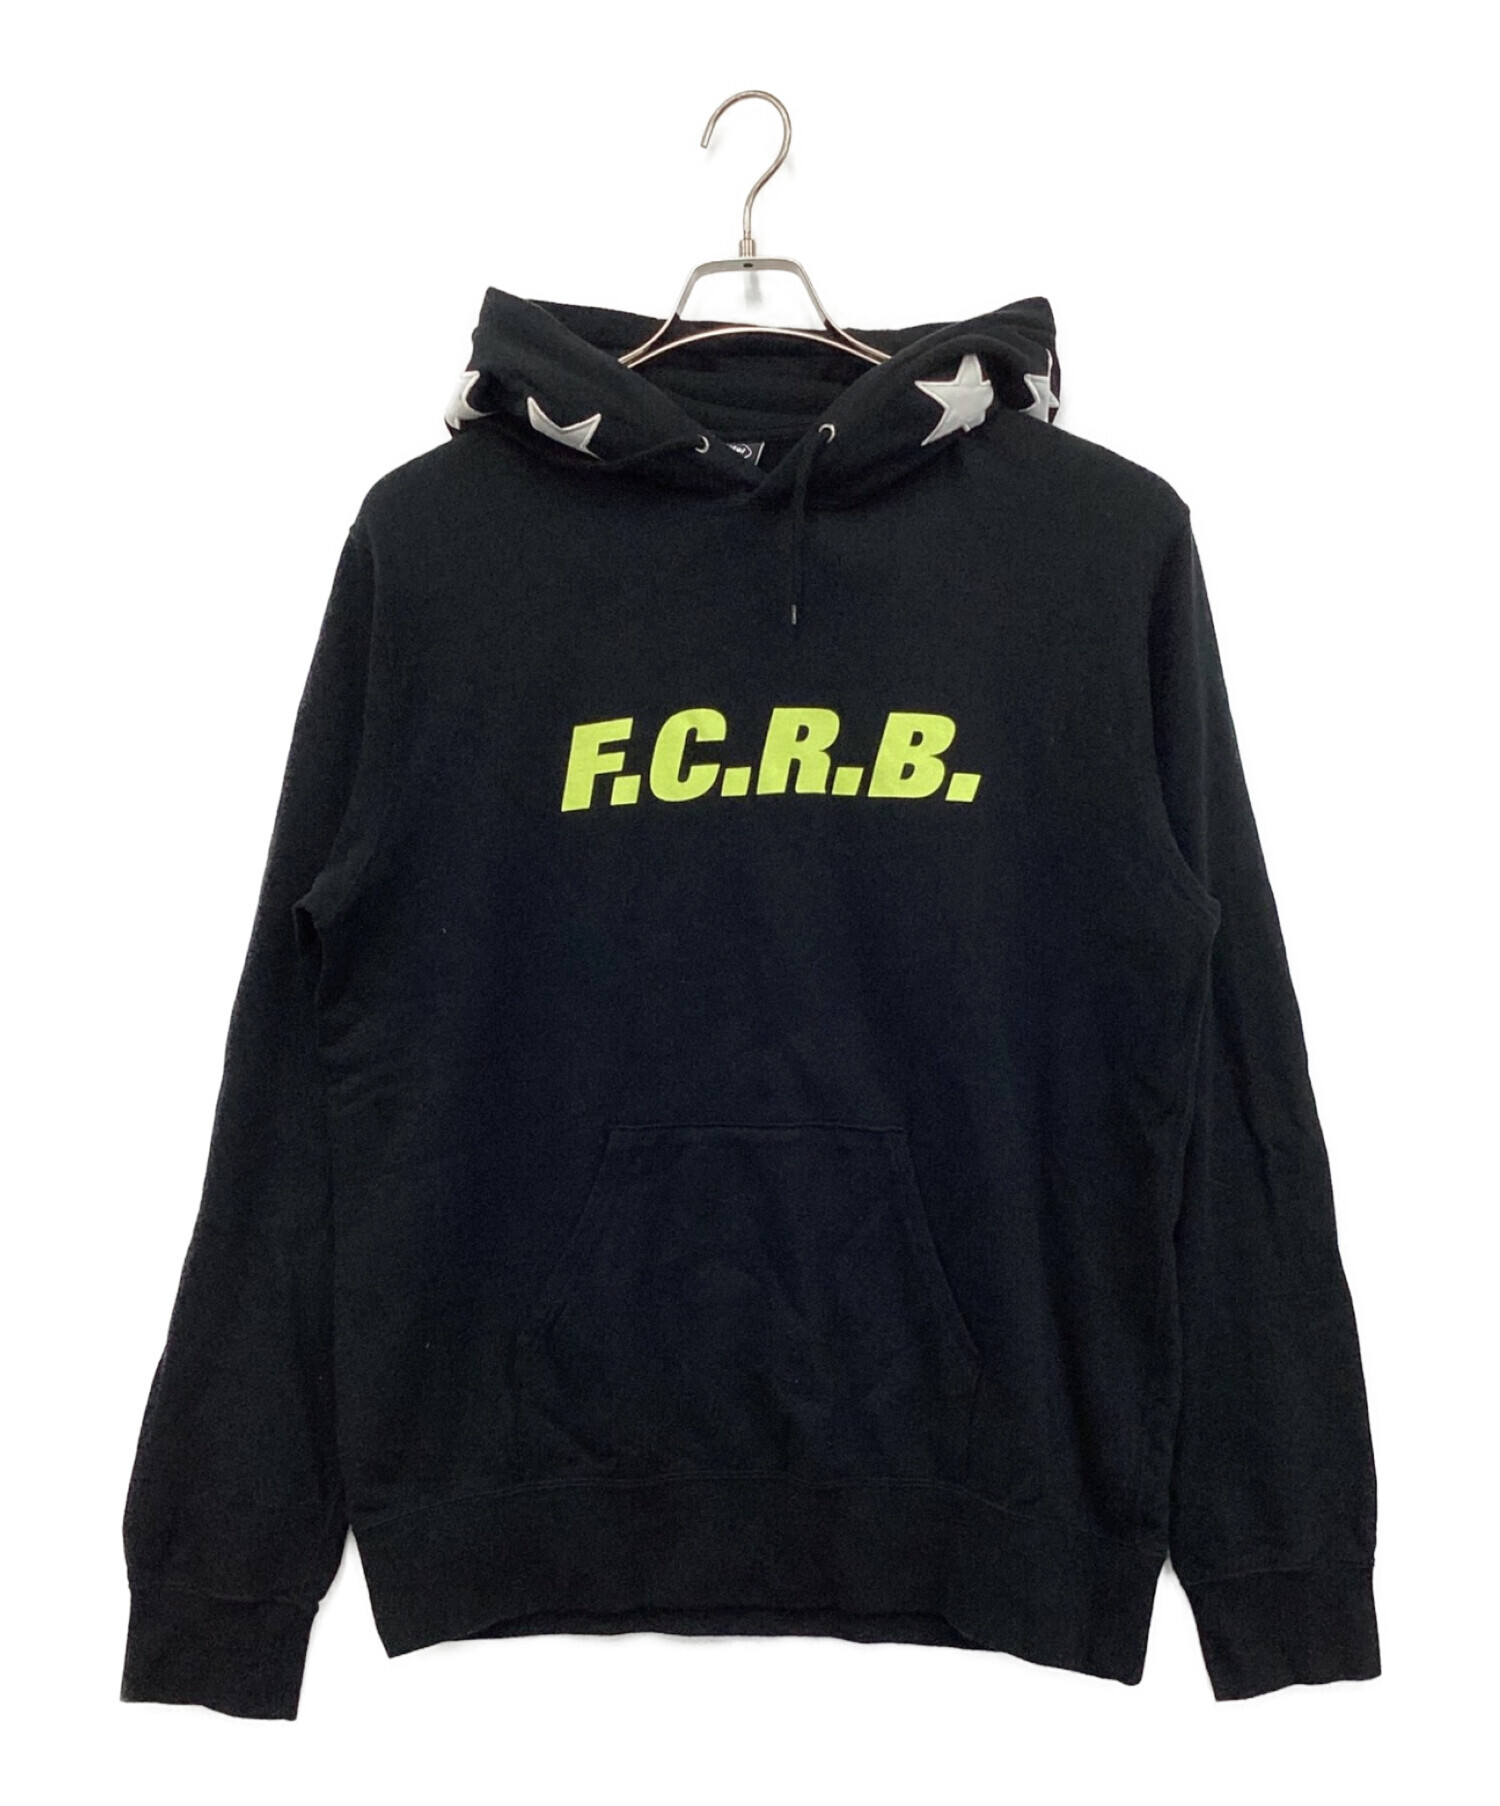 F.C.R.B エフシーアールビー パーカー M 黒 | www.trevires.be